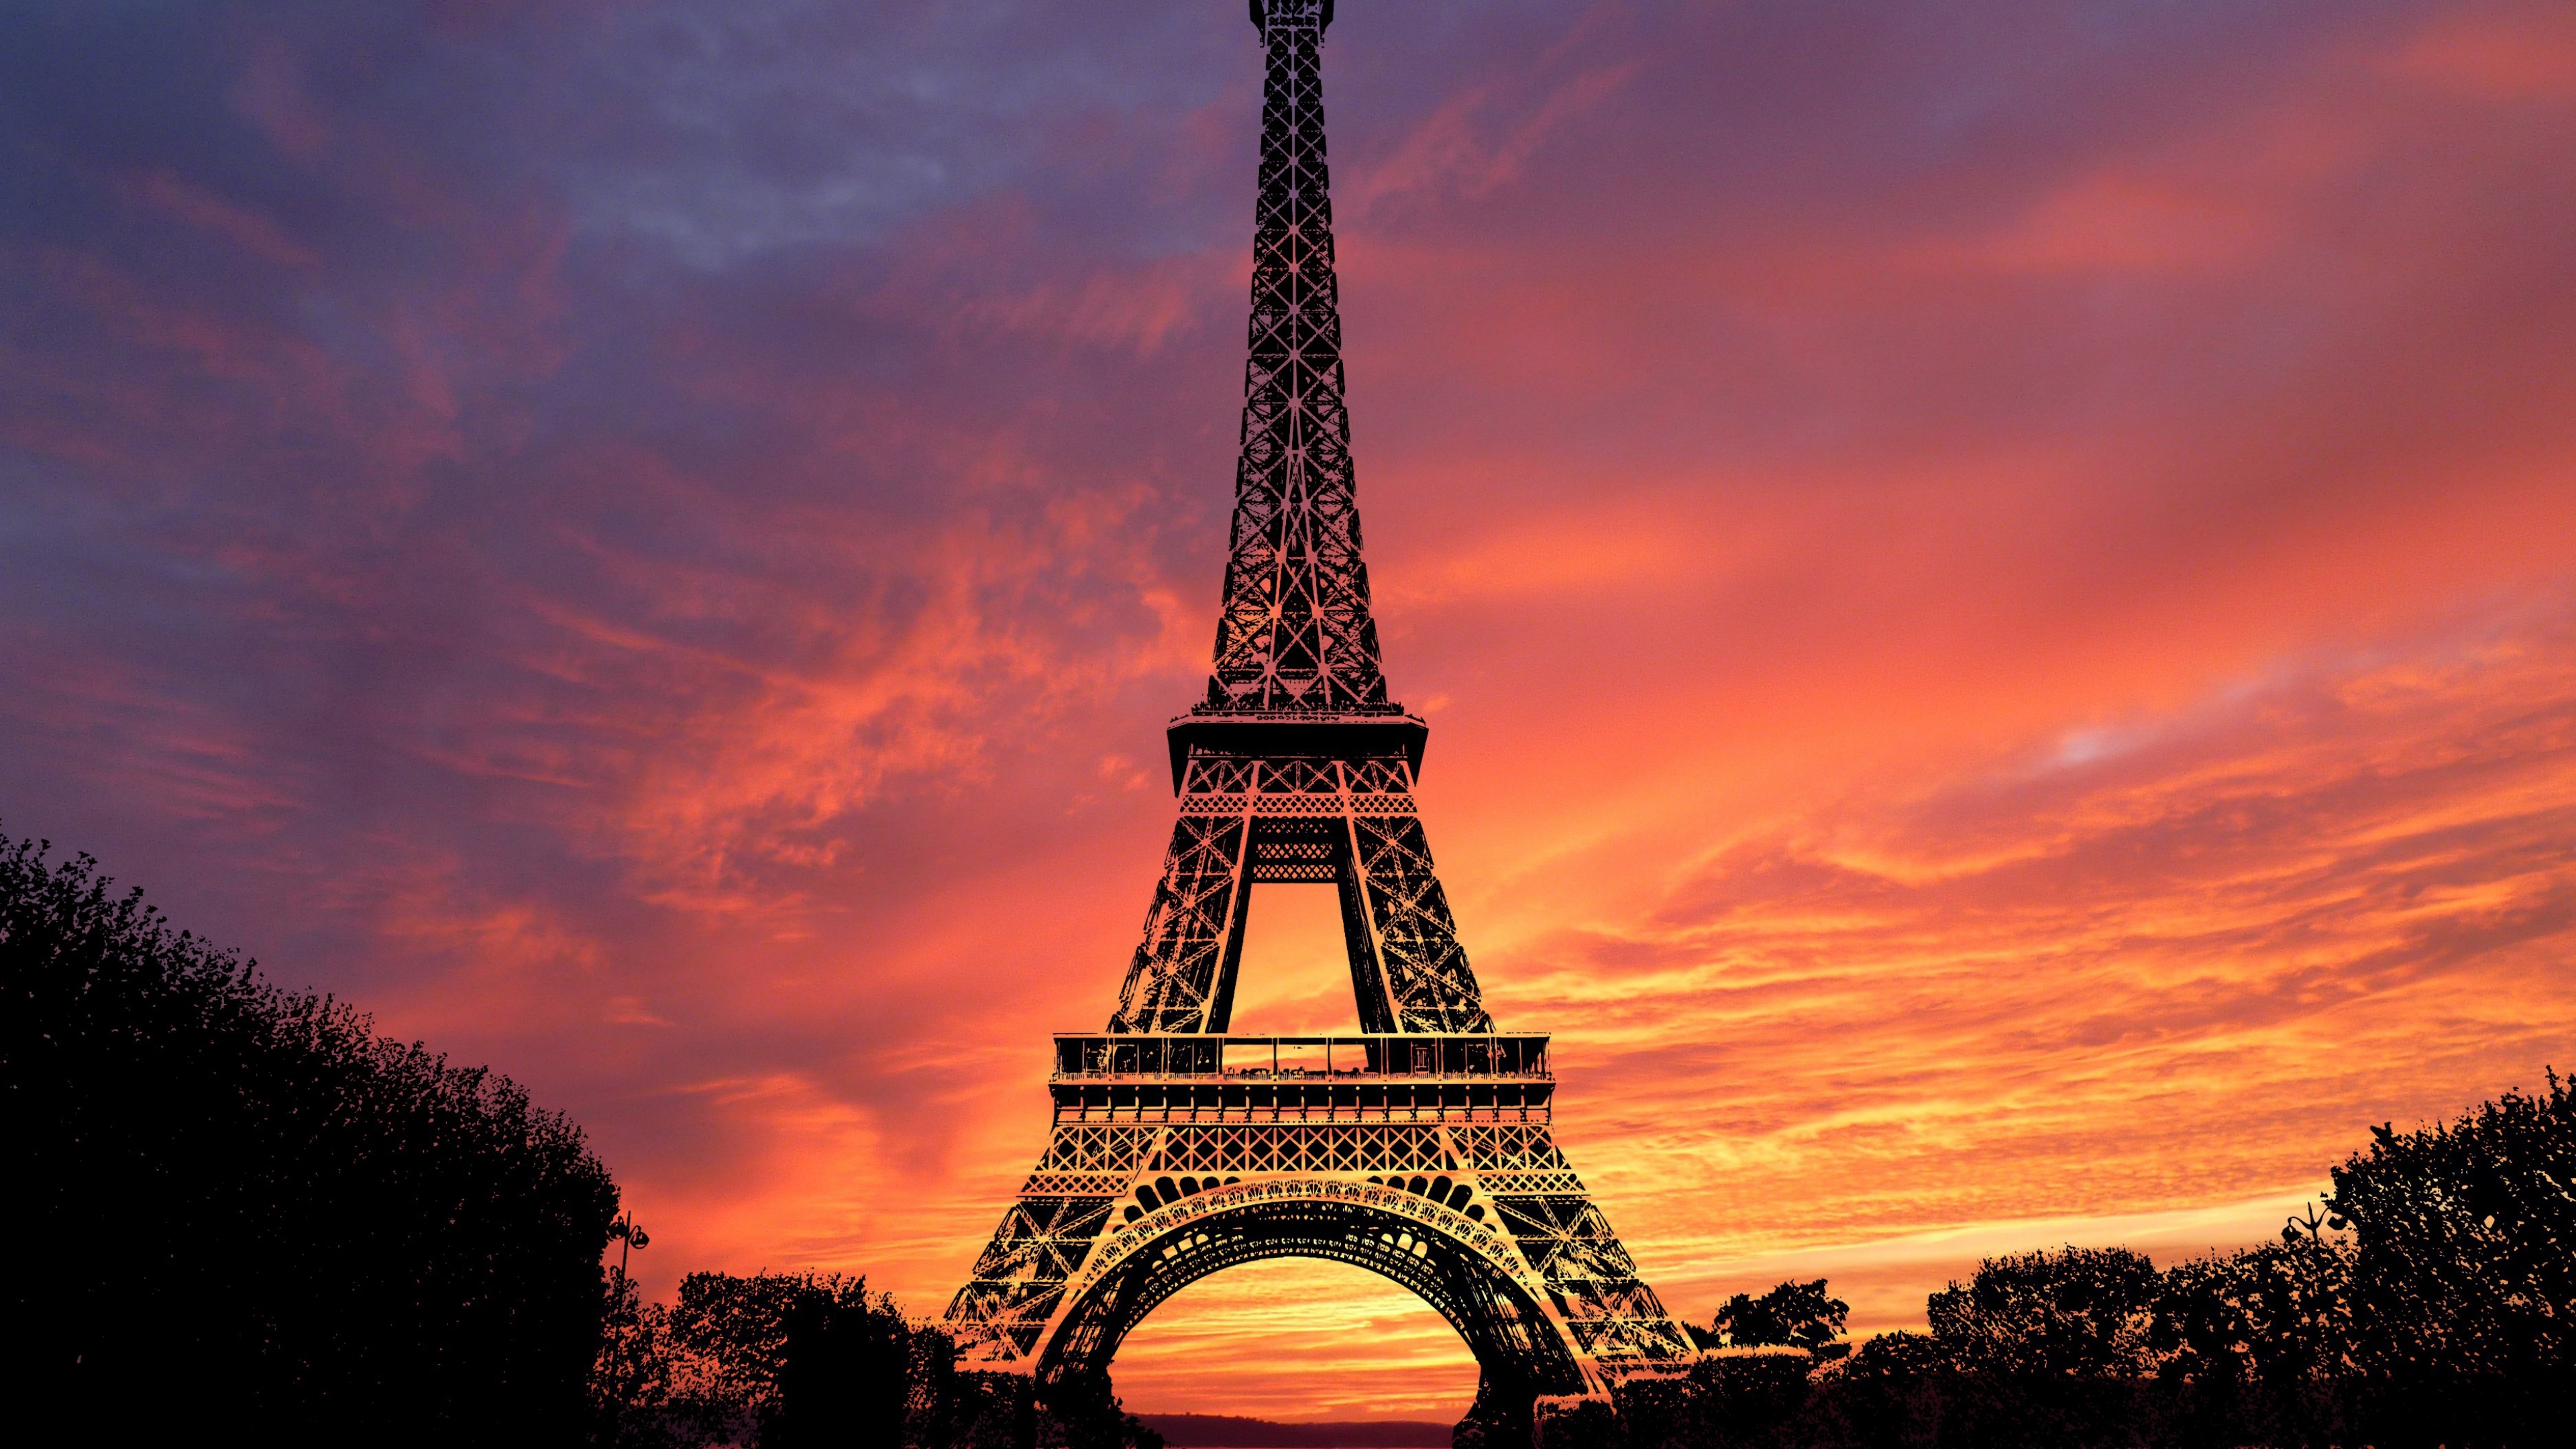 Paris full hd, hdtv, fhd, 1080p wallpapers hd, desktop backgrounds 1920x1080,  images and pictures